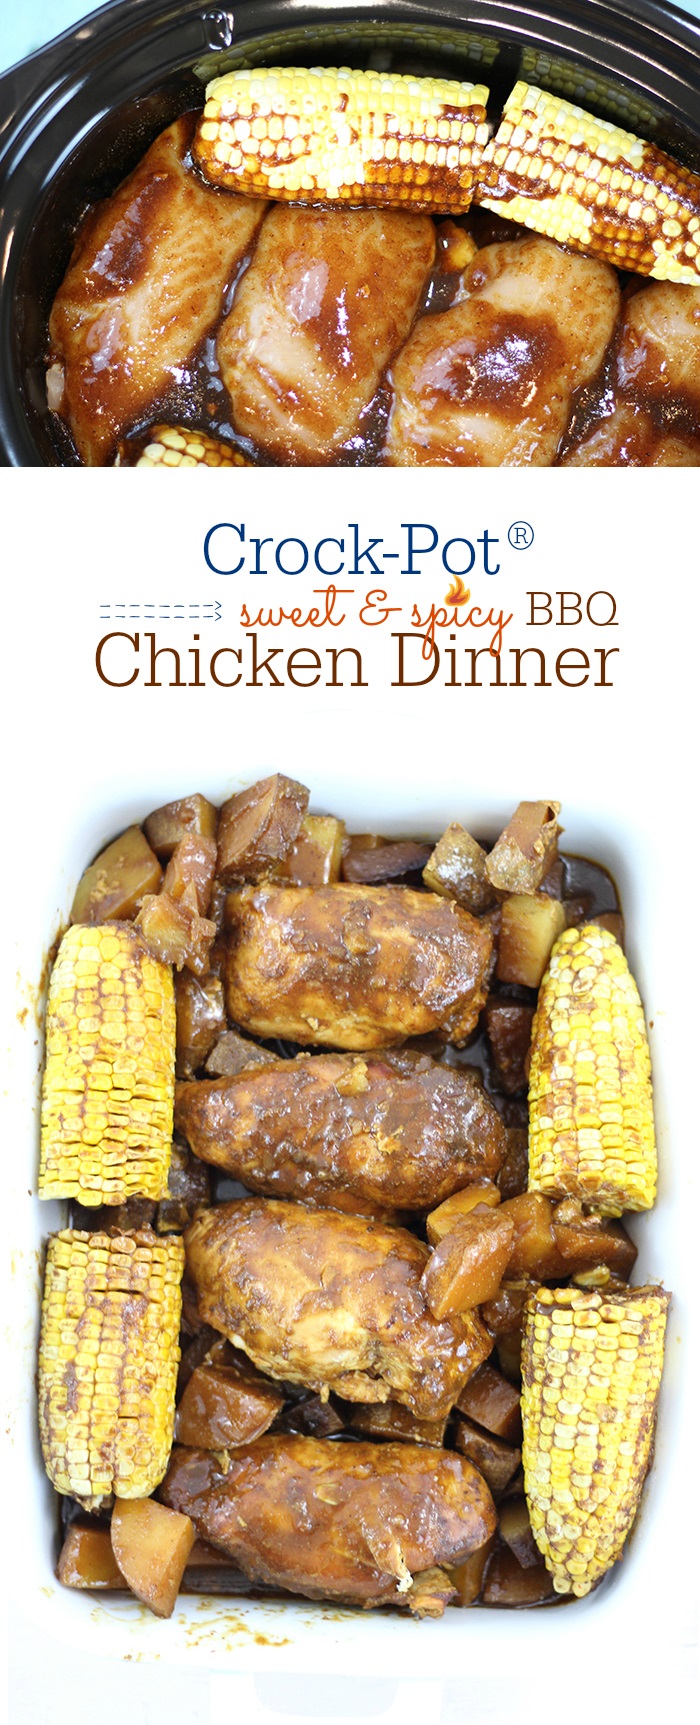 Crock-Pot® Sweet & Spicy BBQ Chicken Dinner. Toss all of your ingredients into your pot and dinner is ready in 5 hours!